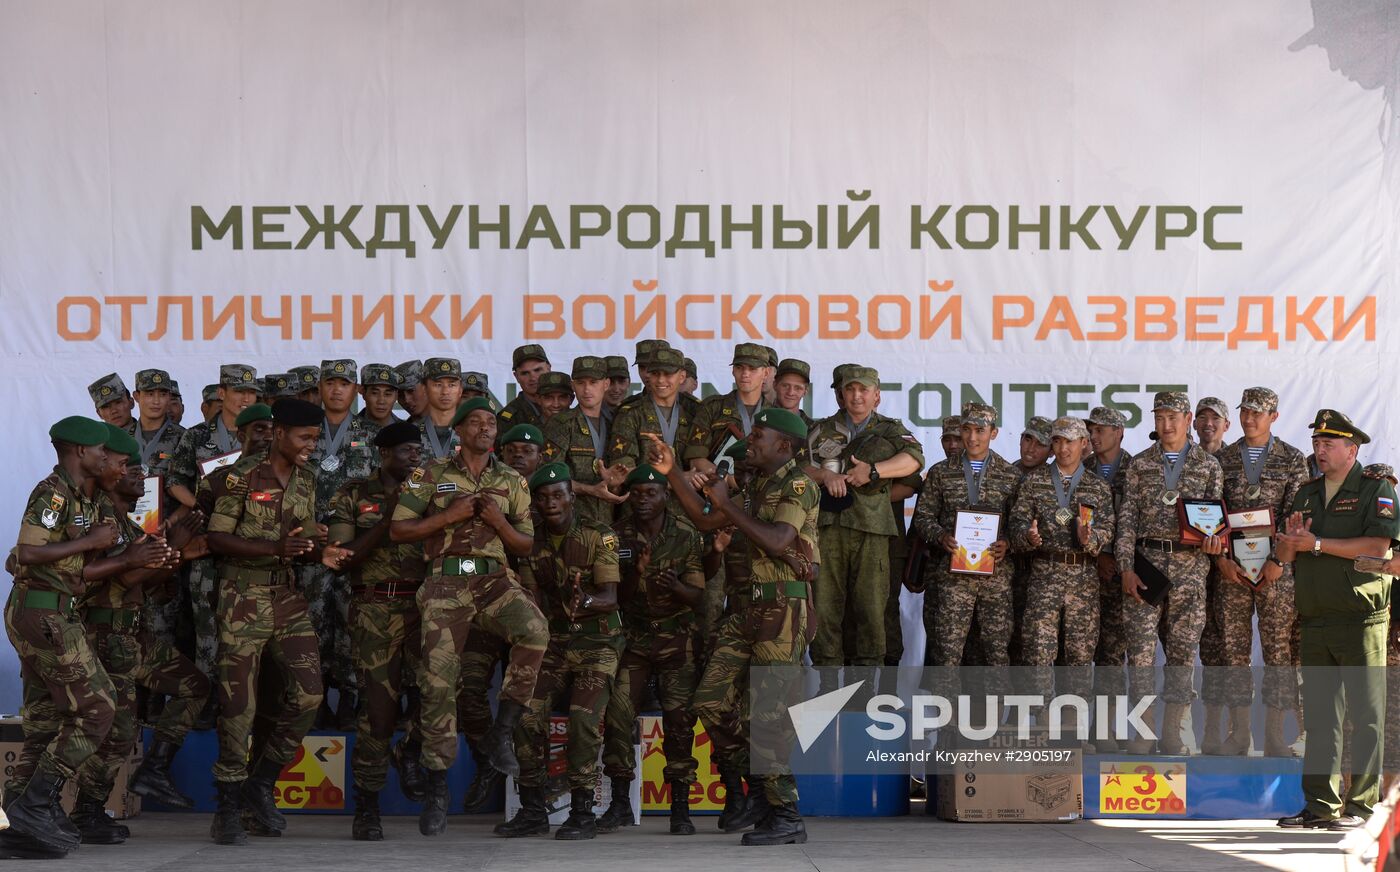 Closing ceremony of Masters of Reconnaissance competition in Novosibirsk Region